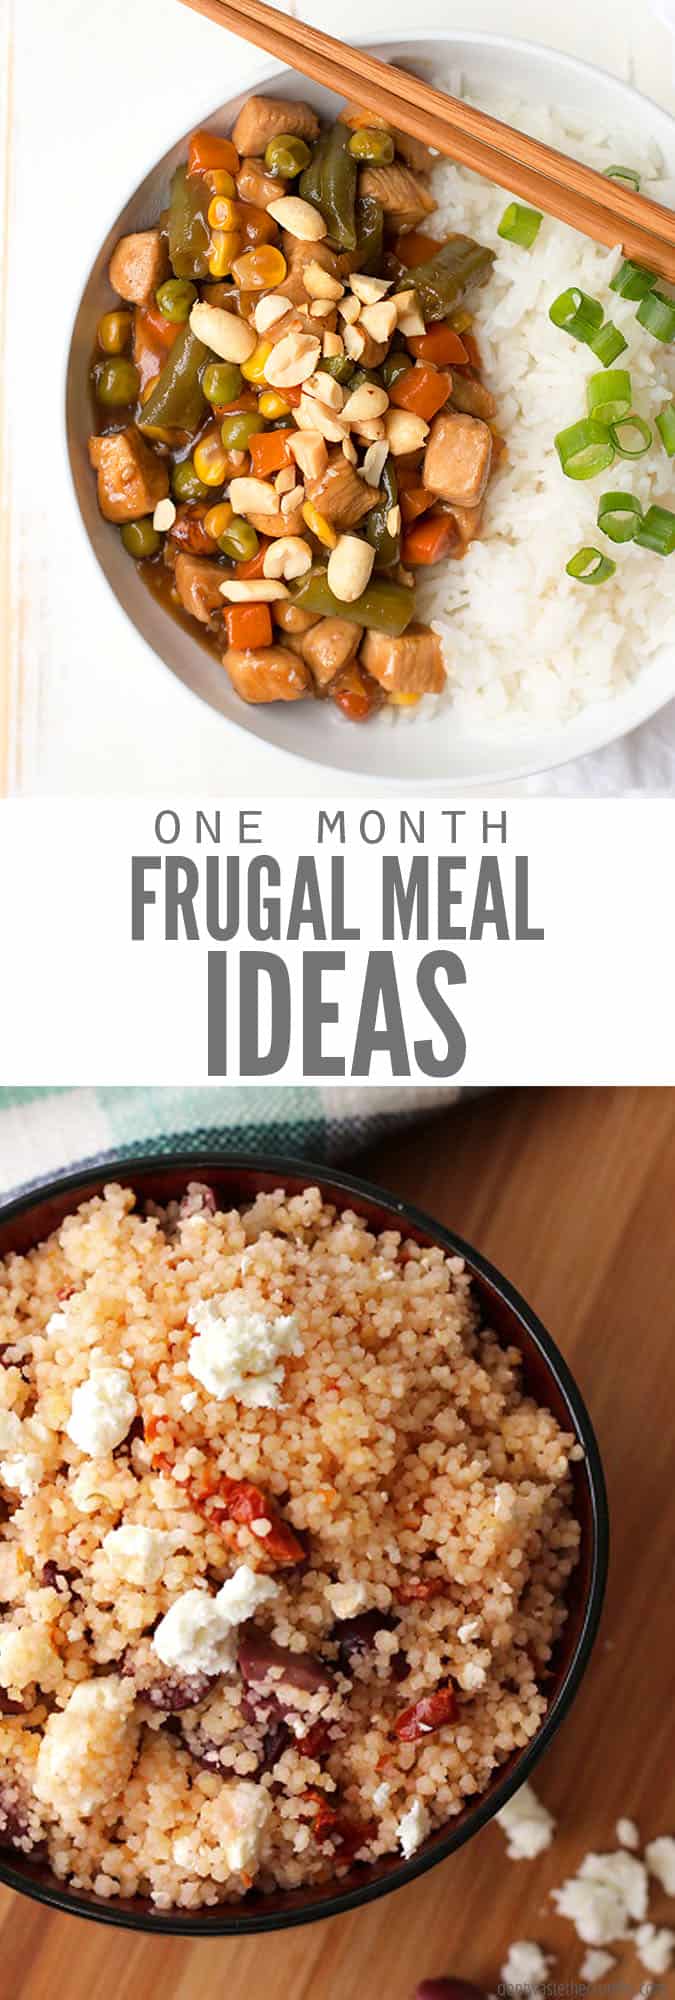 Frugal Meal Ideas | One Month Meal Plan for March